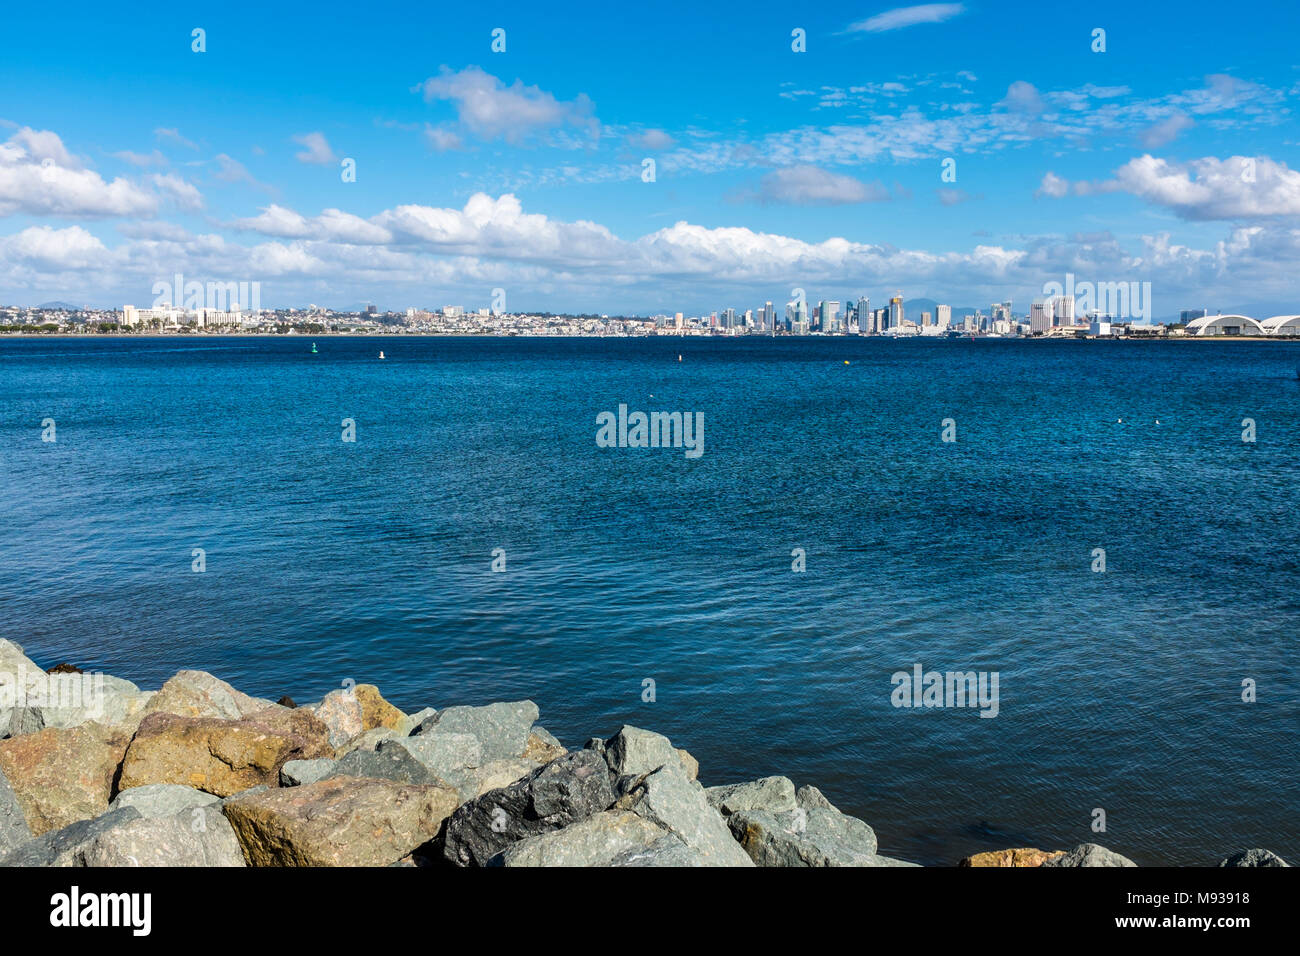 SAN DIEGO, CALIFORNIA, USA - Skyline of Downtown central San Diego from across the bay at Shelter Island. Stock Photo